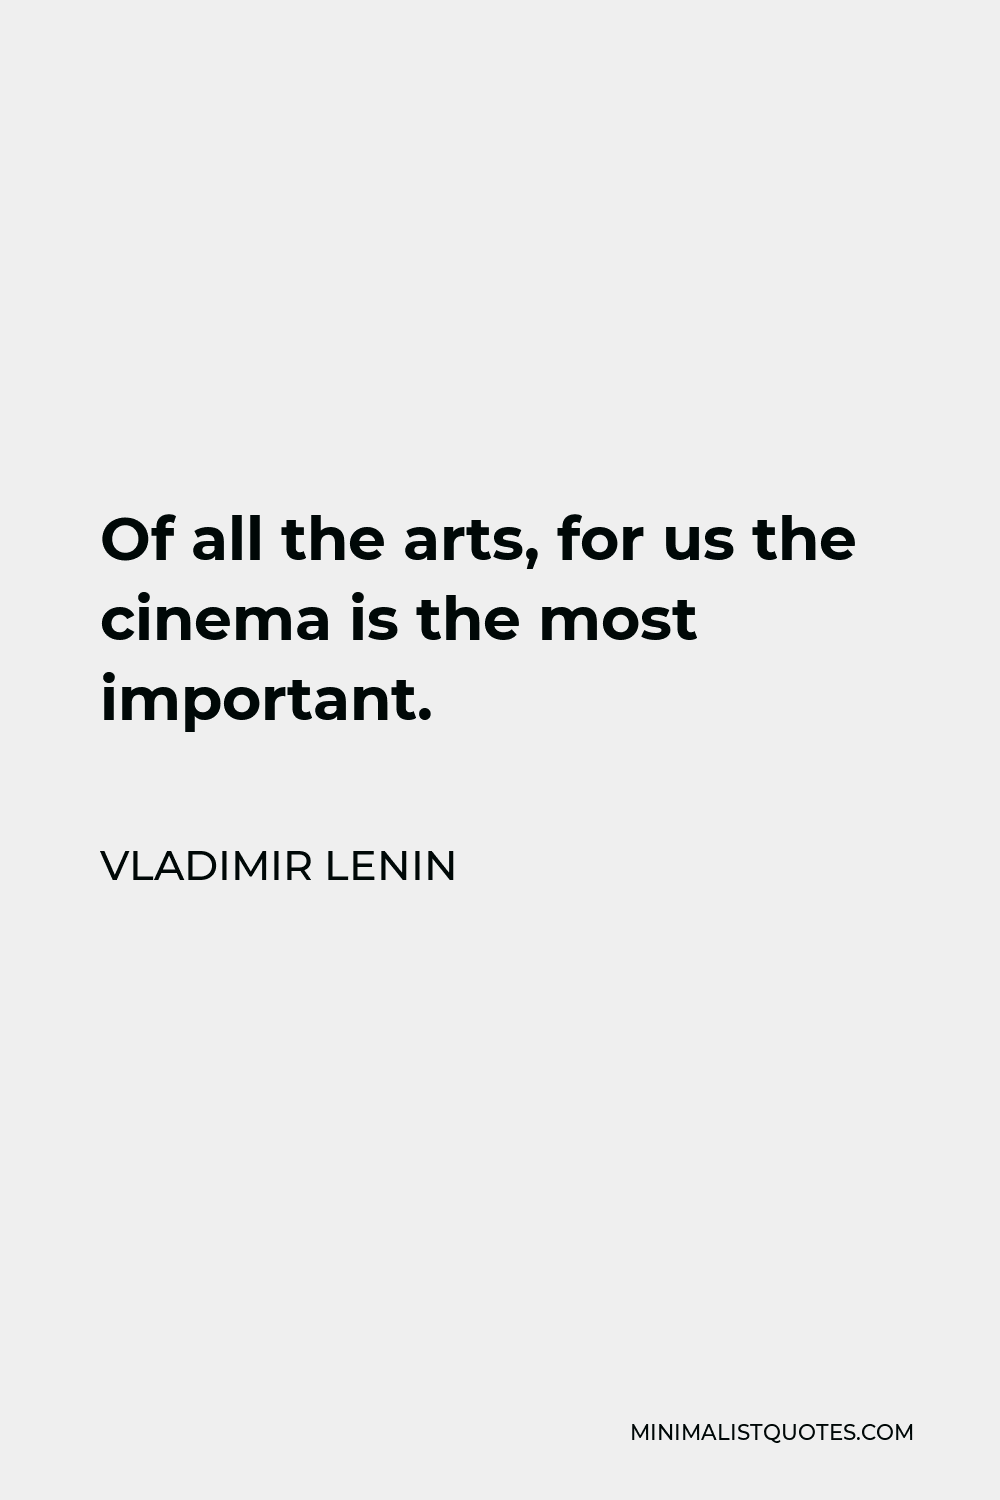 Vladimir Lenin Quote - Of all the arts, for us the cinema is the most important.